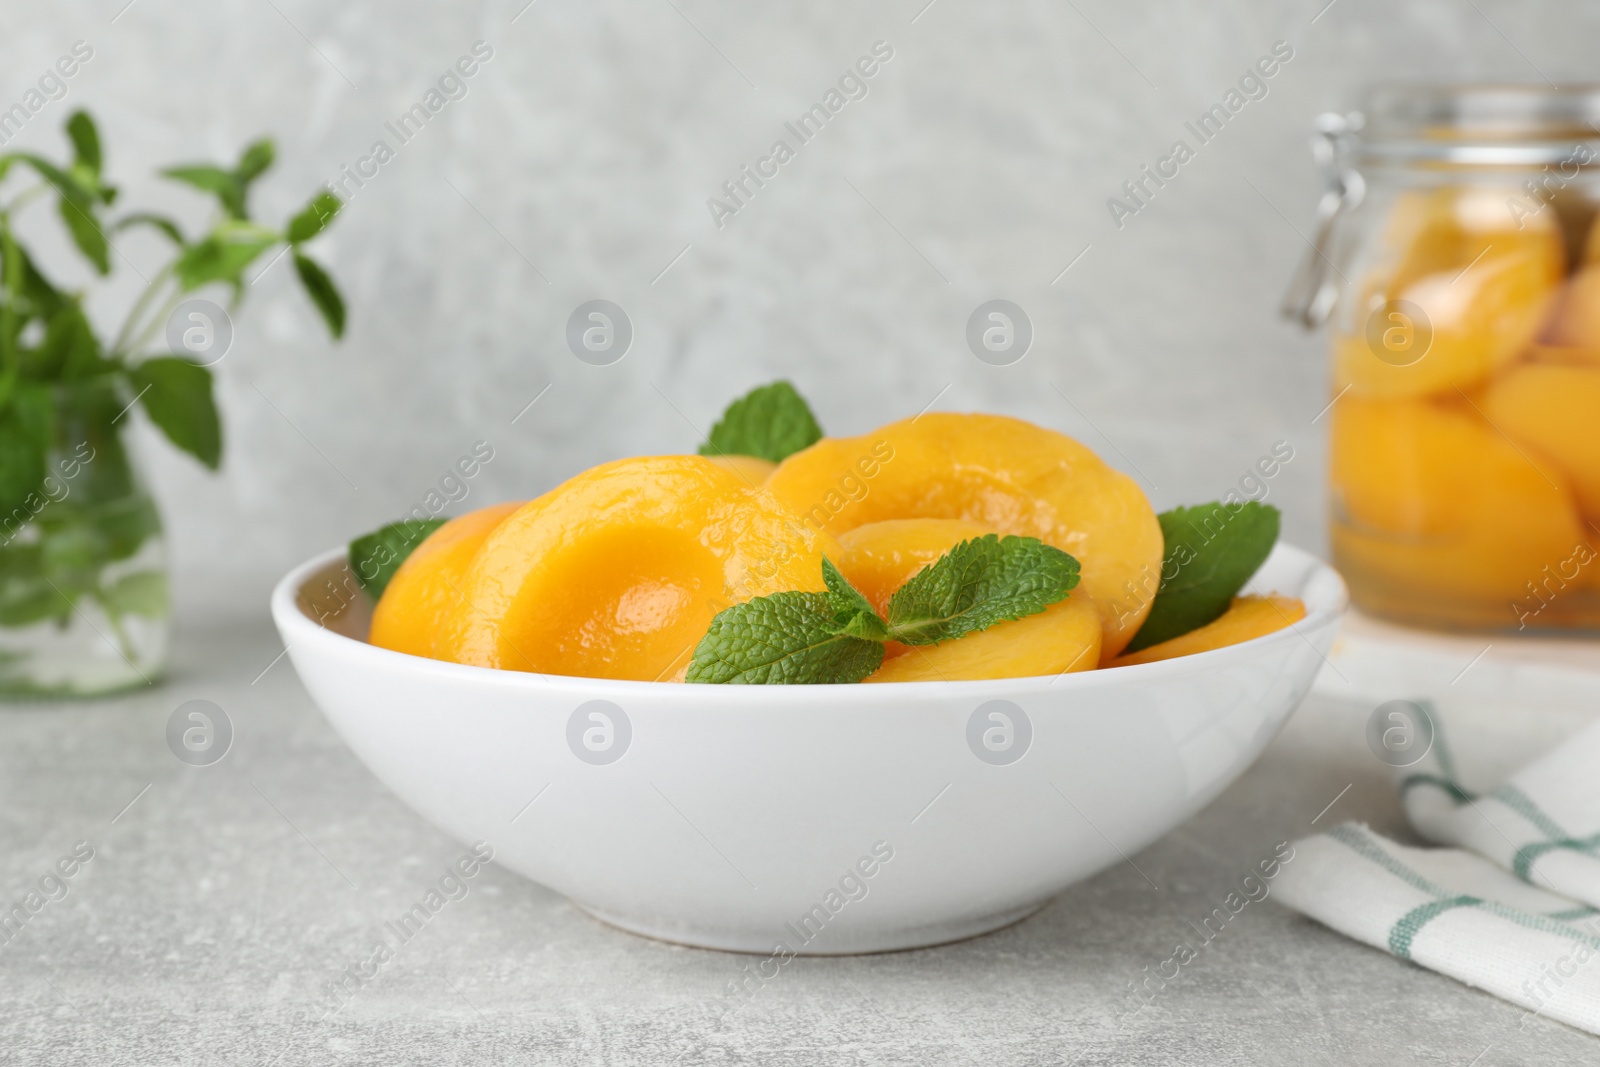 Photo of Canned peach halves in bowl on light table